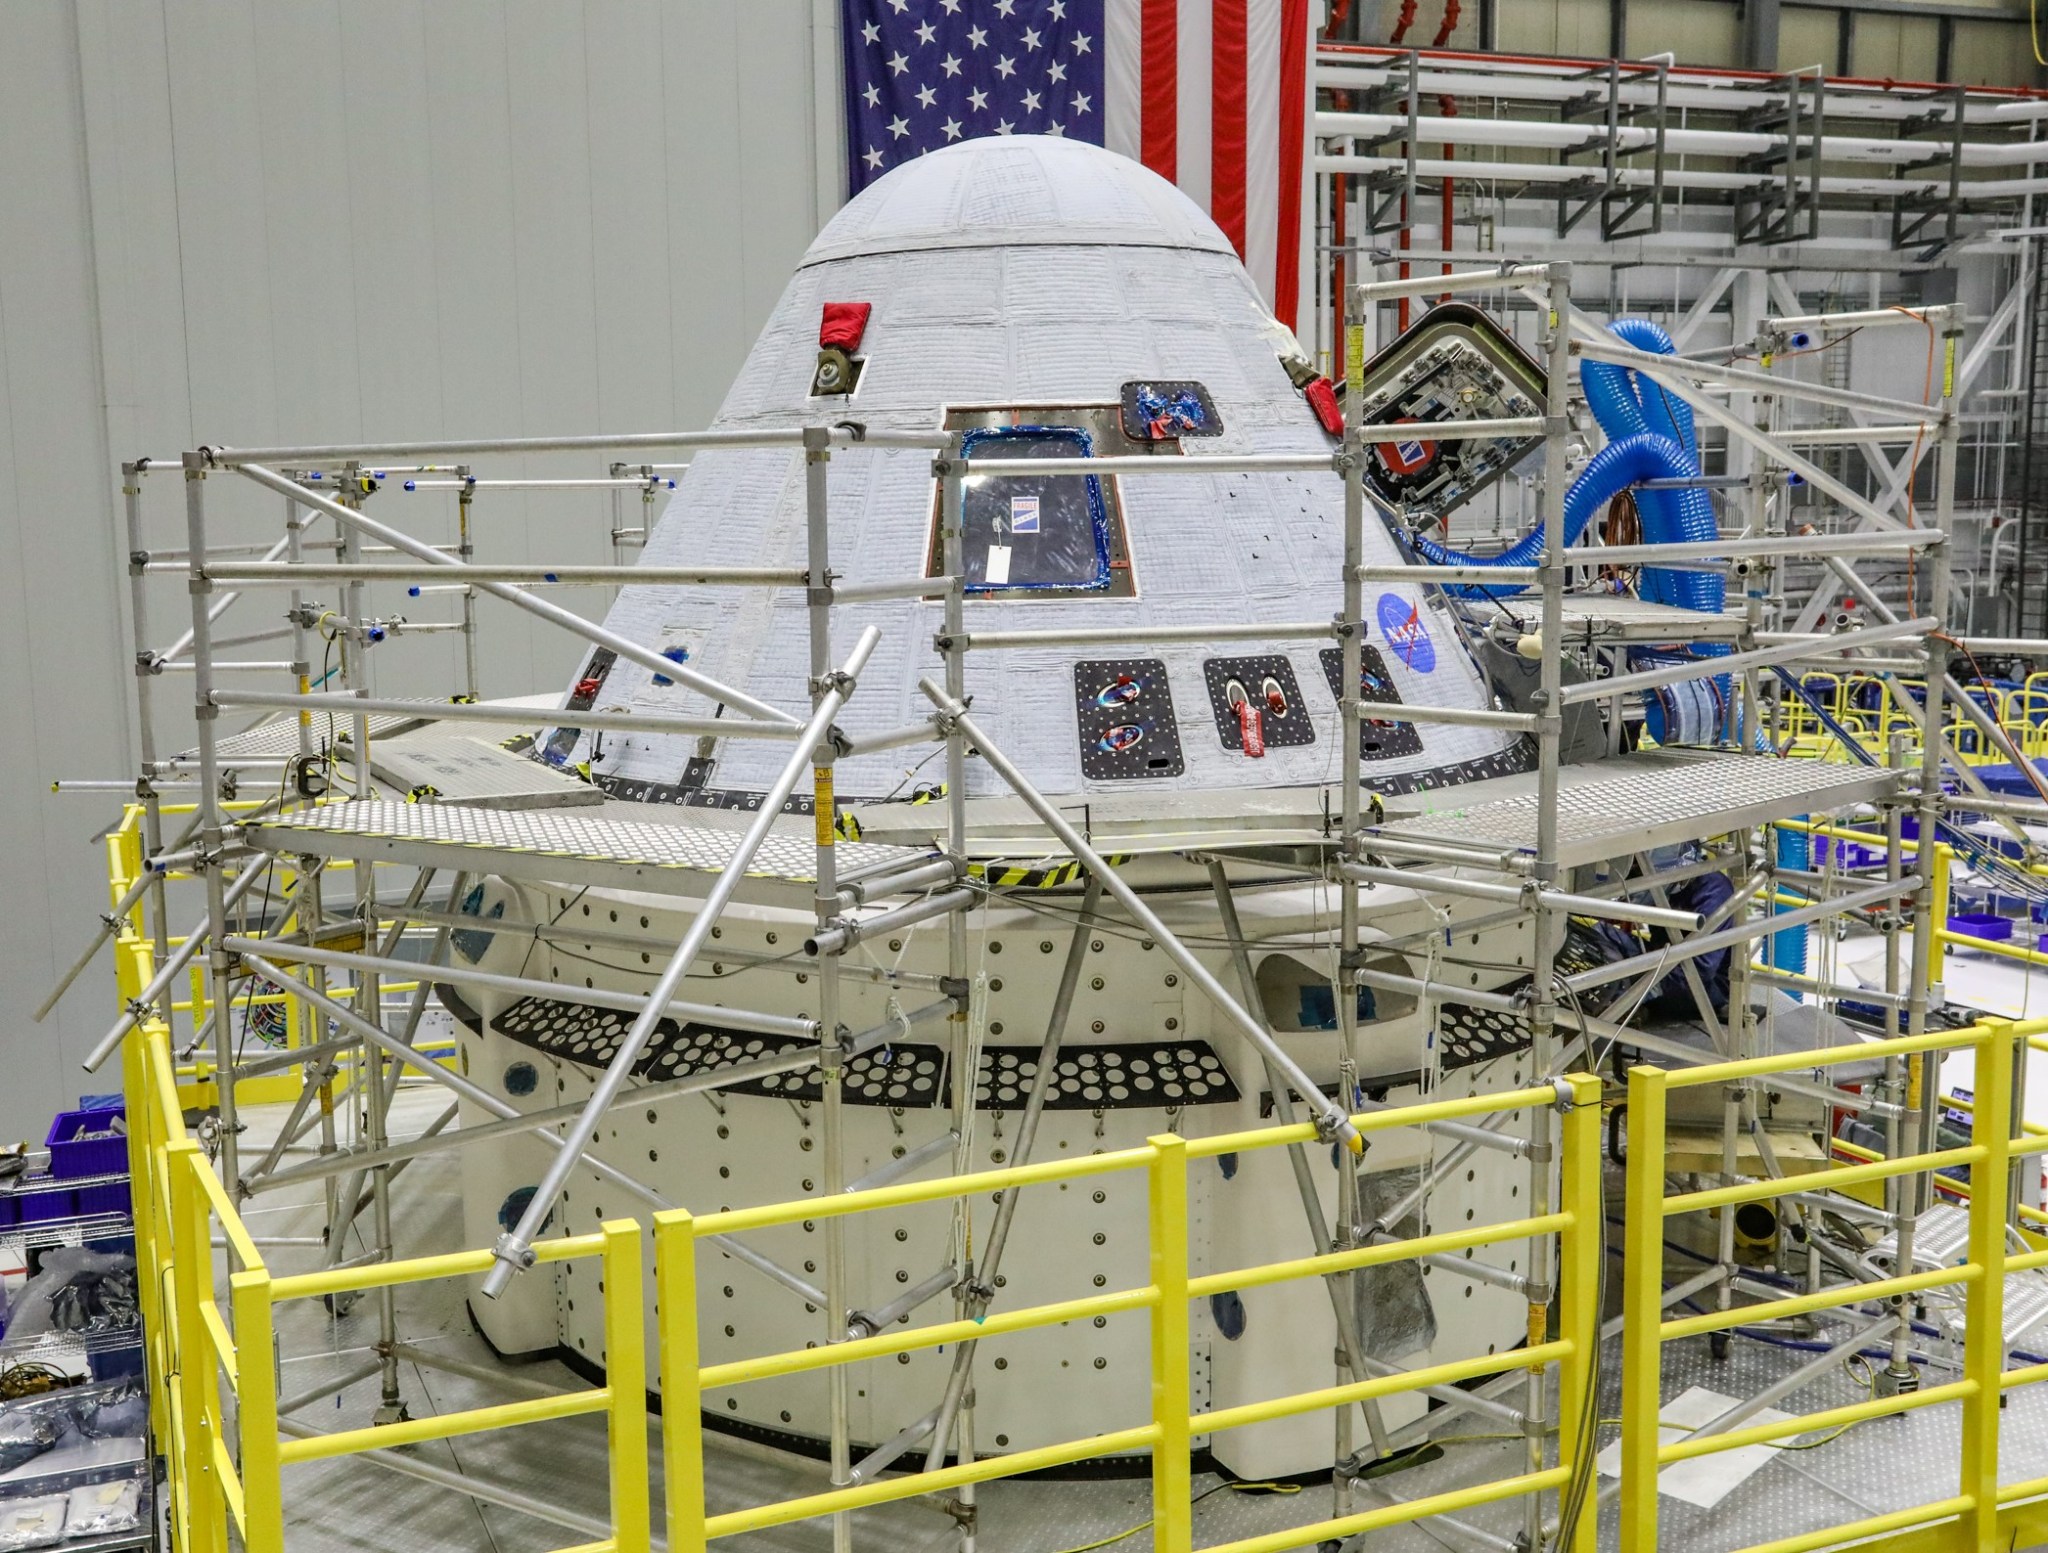 Boeing's Orbital Flight Test-2 Starliner is pictured in the Commercial Crew and Cargo Processing Facility